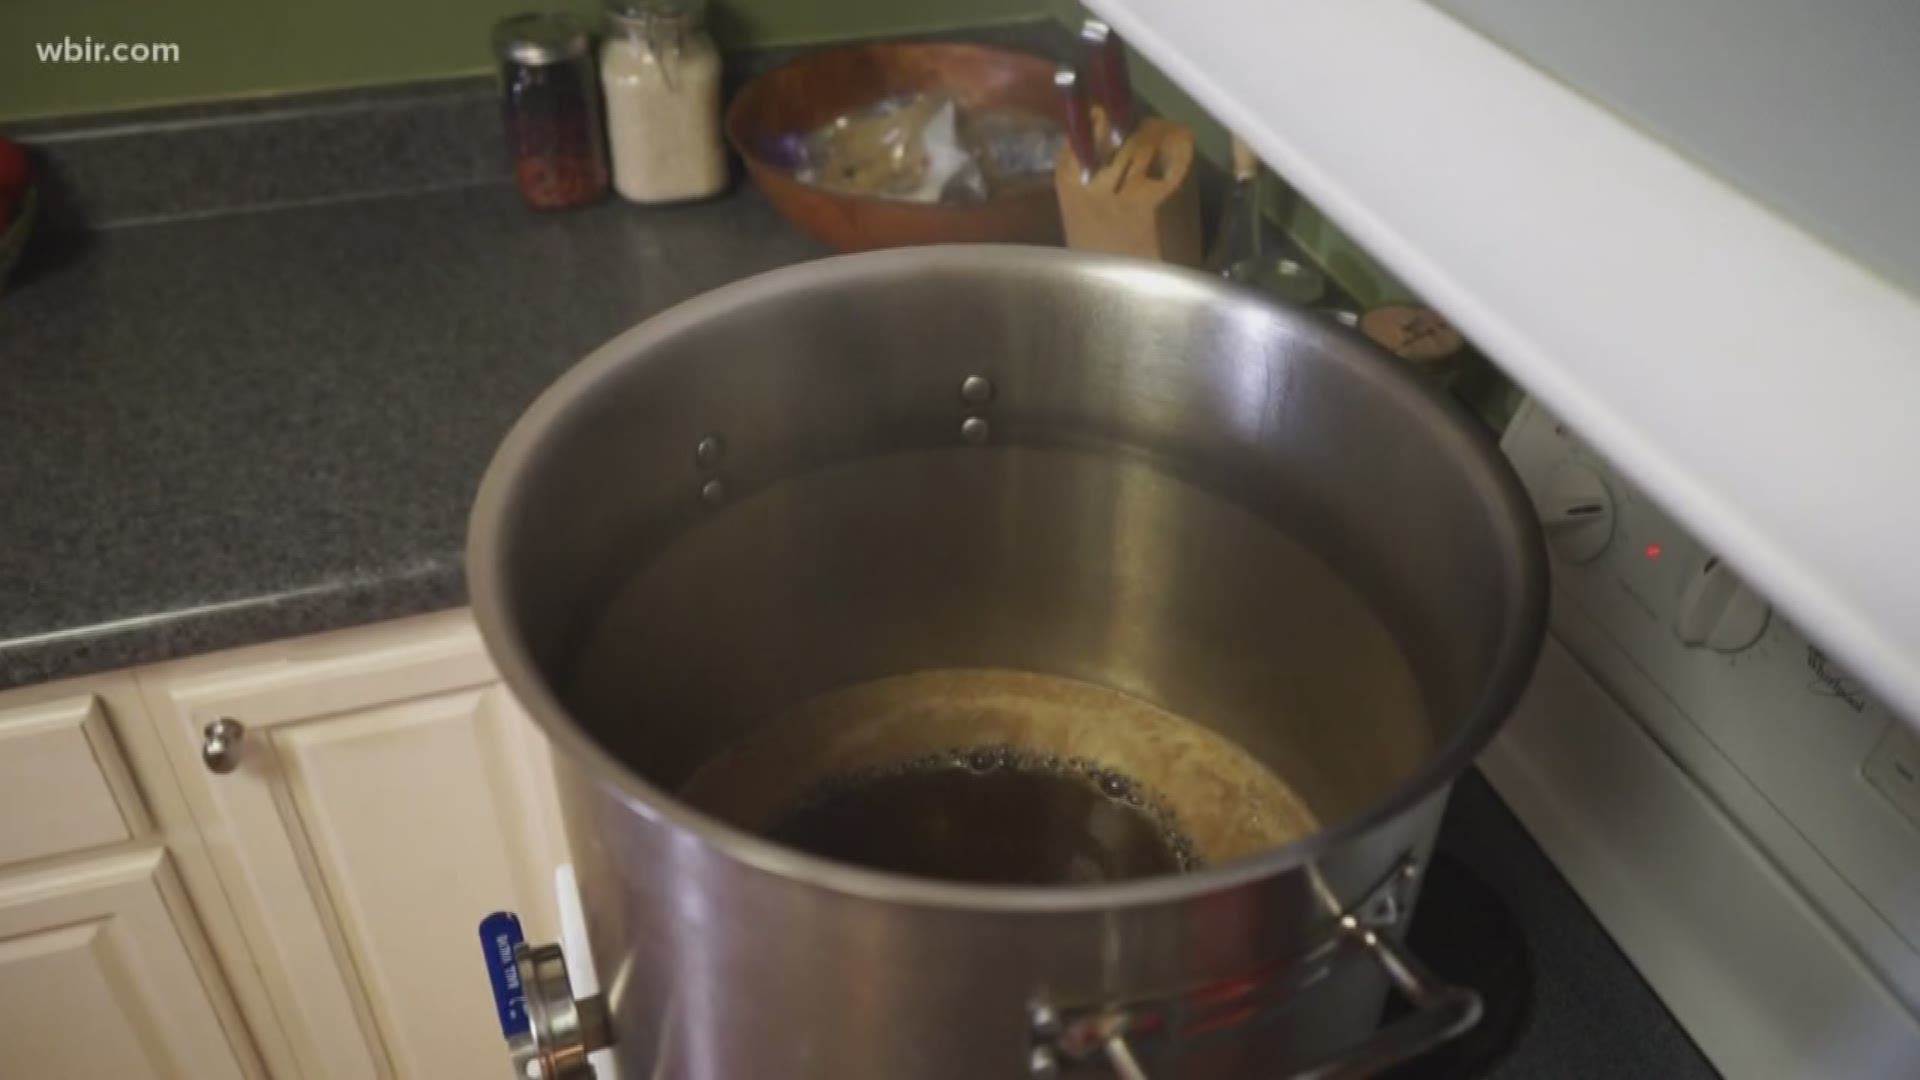 From the grain to the hops to the yeast... brewing great tasting beer can happen right in your kitchen.